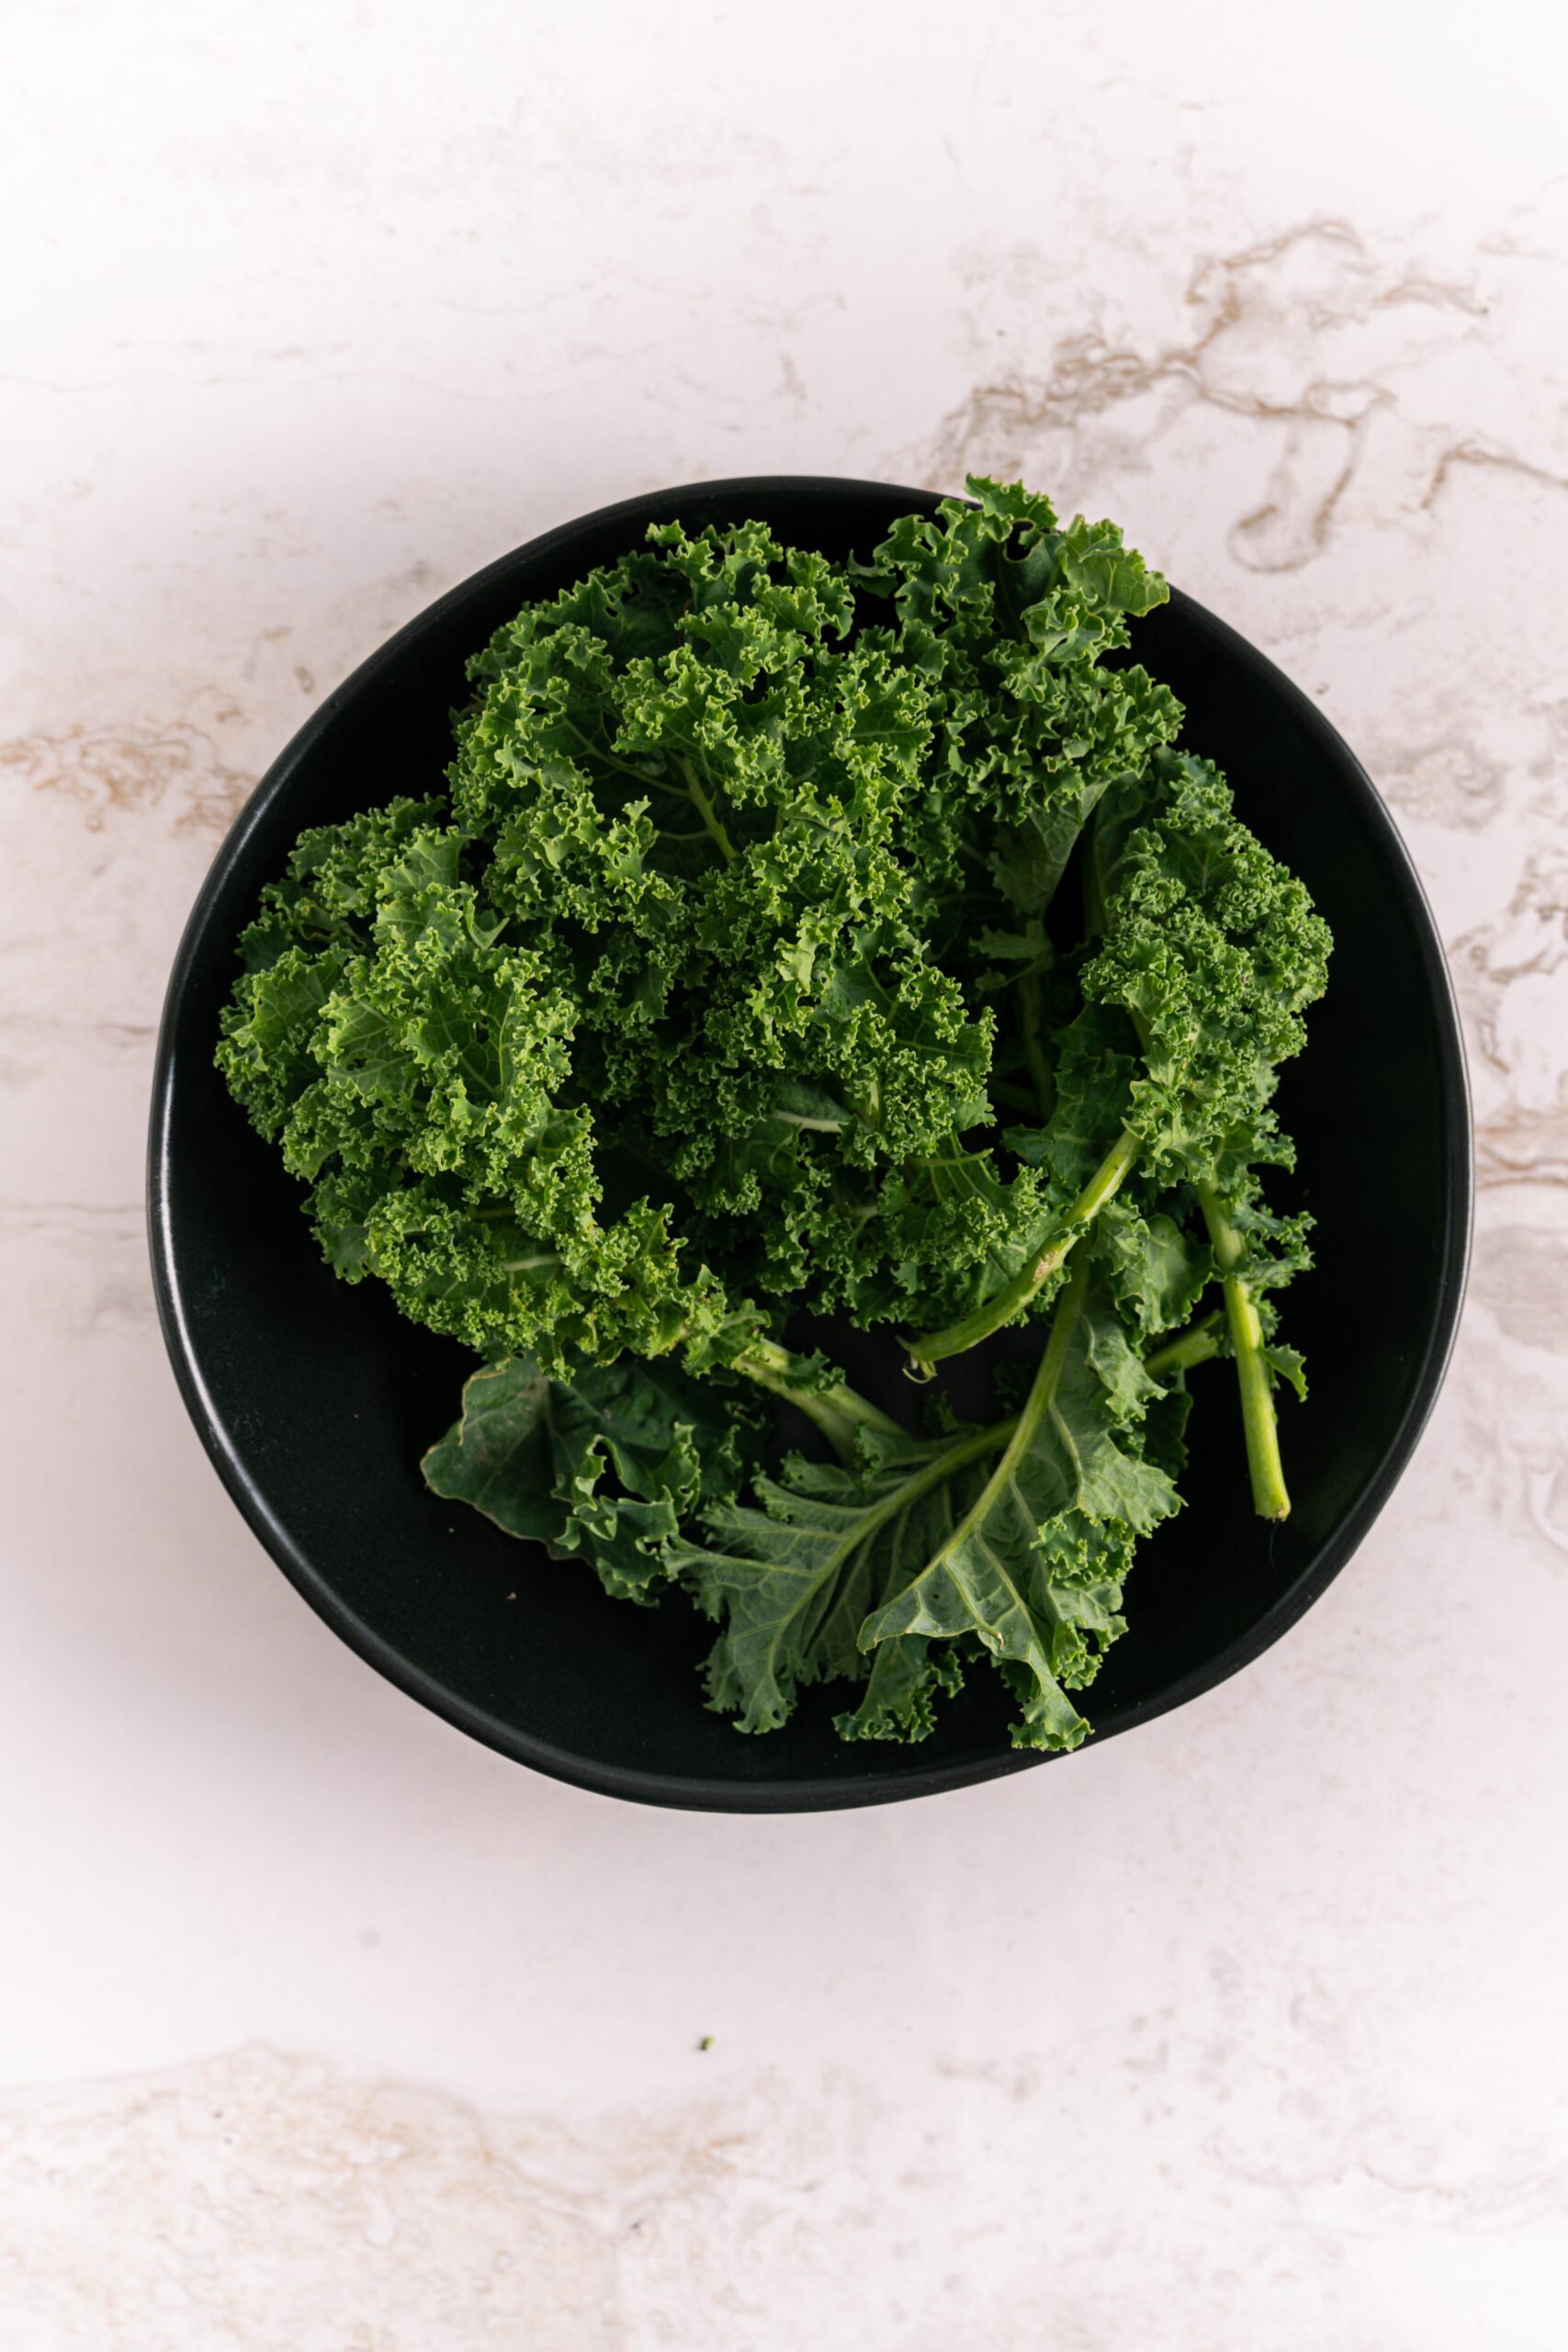 How to tell if kale is bad [Plus helpful tips]